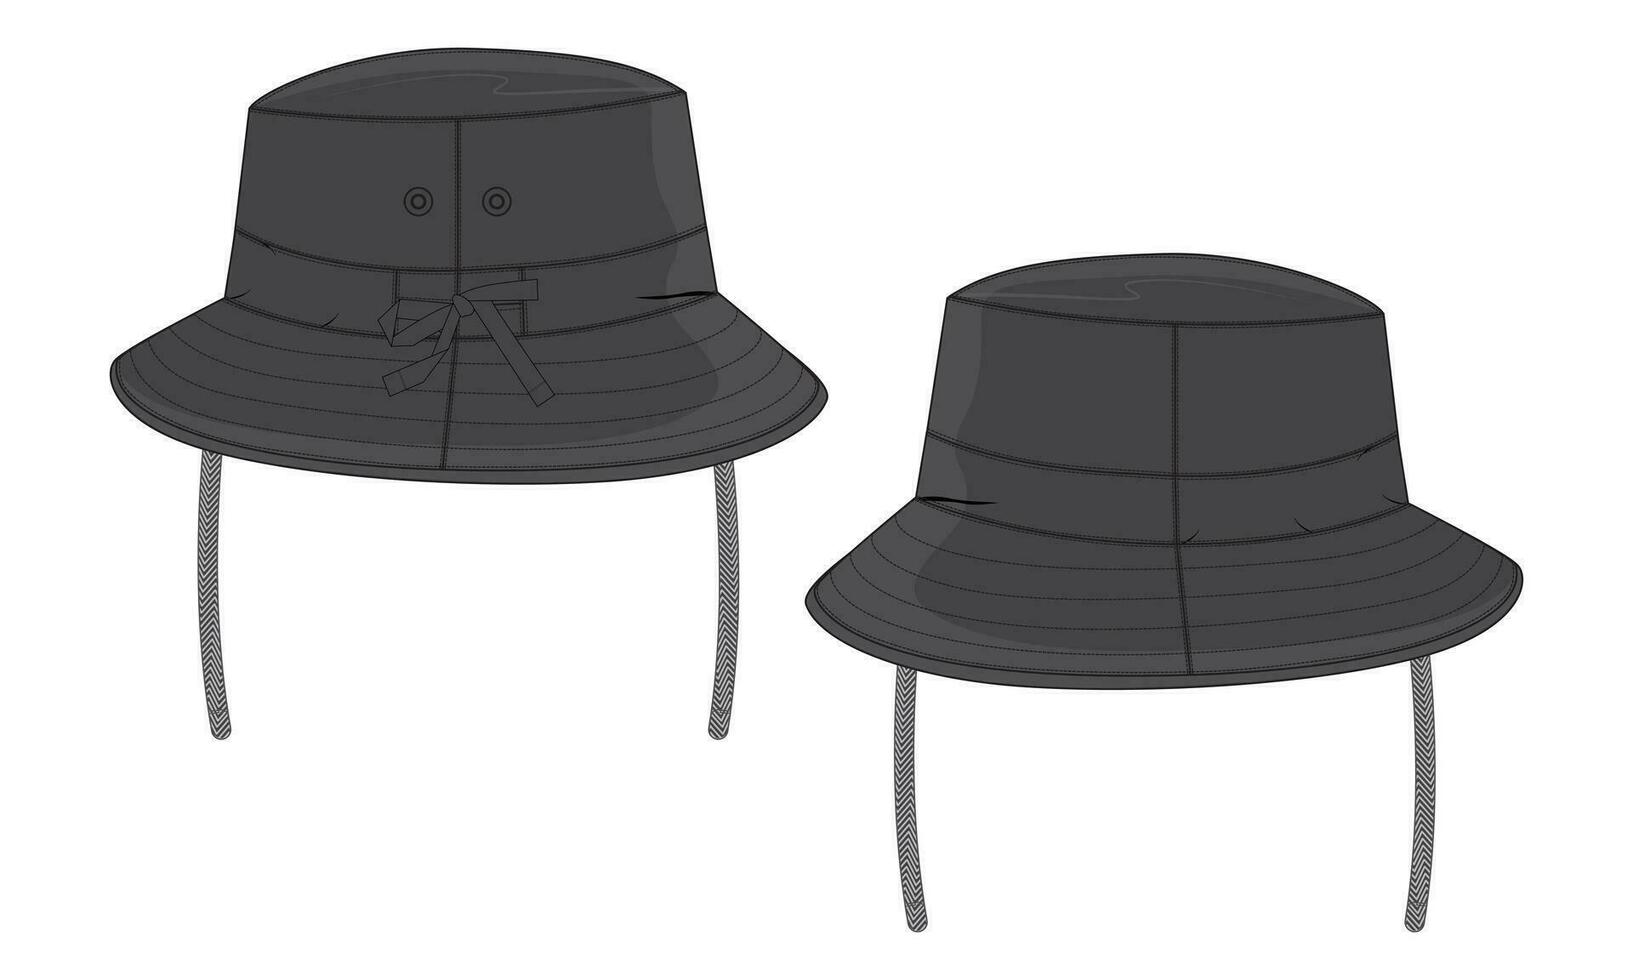 Bucket Hat cap technical drawing fashion flat sketch vector illustration template front and back views